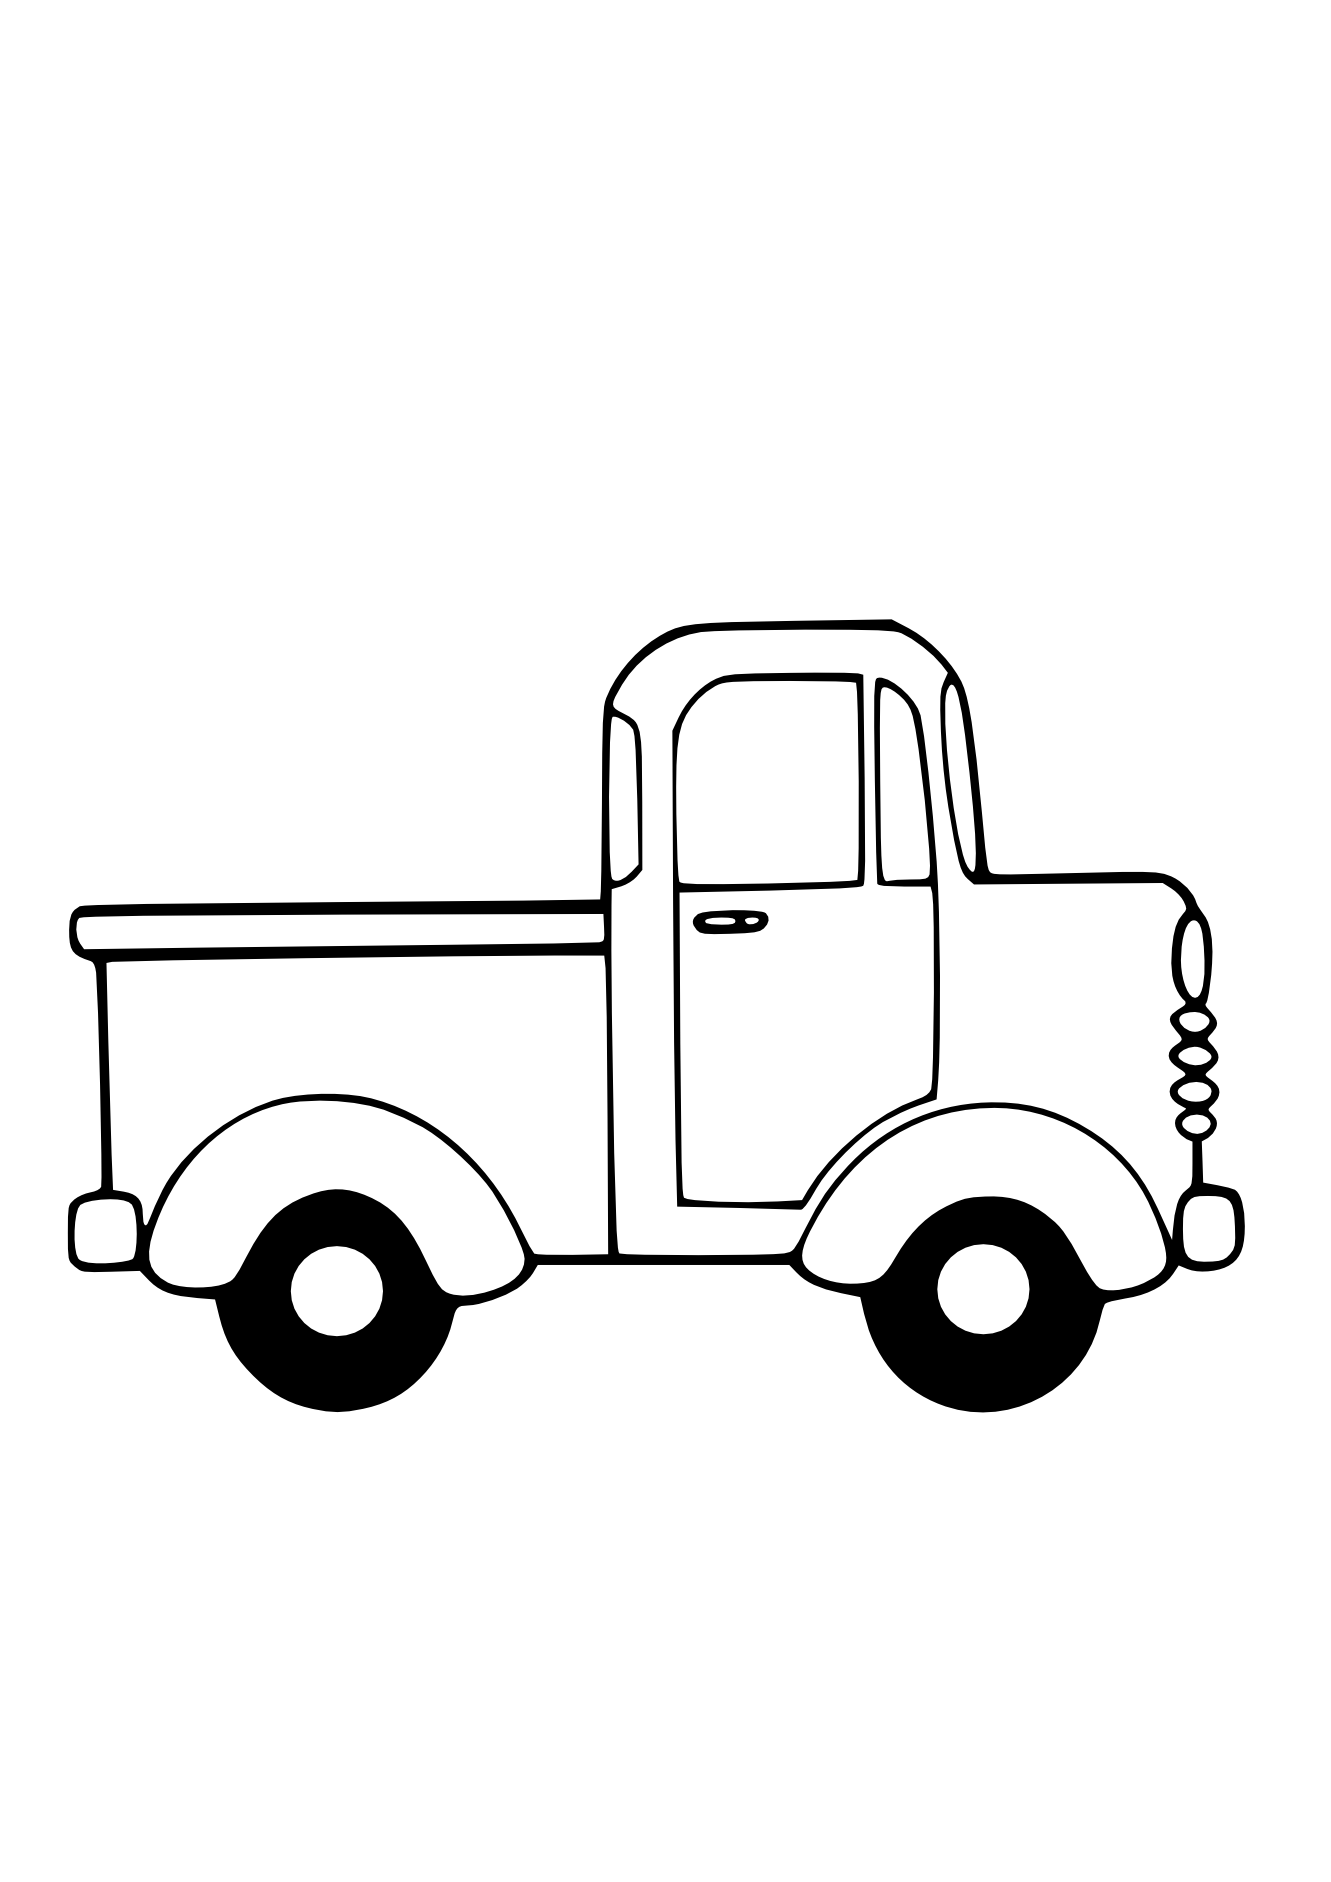 Chevy Truck Clipart Black And White | Clipart Panda - Free Clipart ...